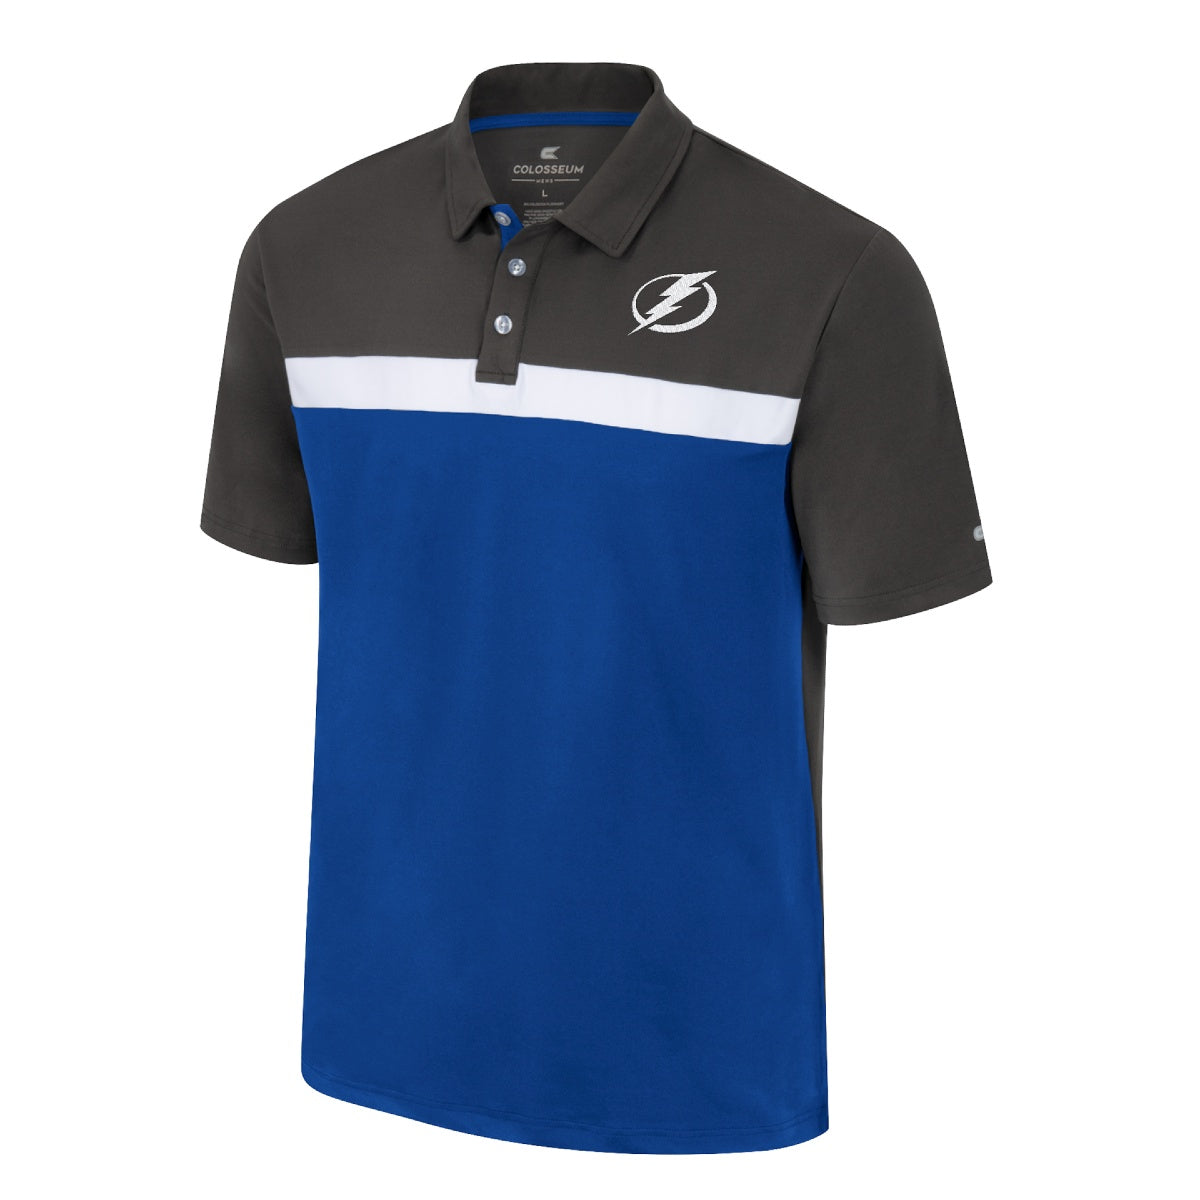 Men's Tampa Bay Colosseum Lightning Color Blocked Polo